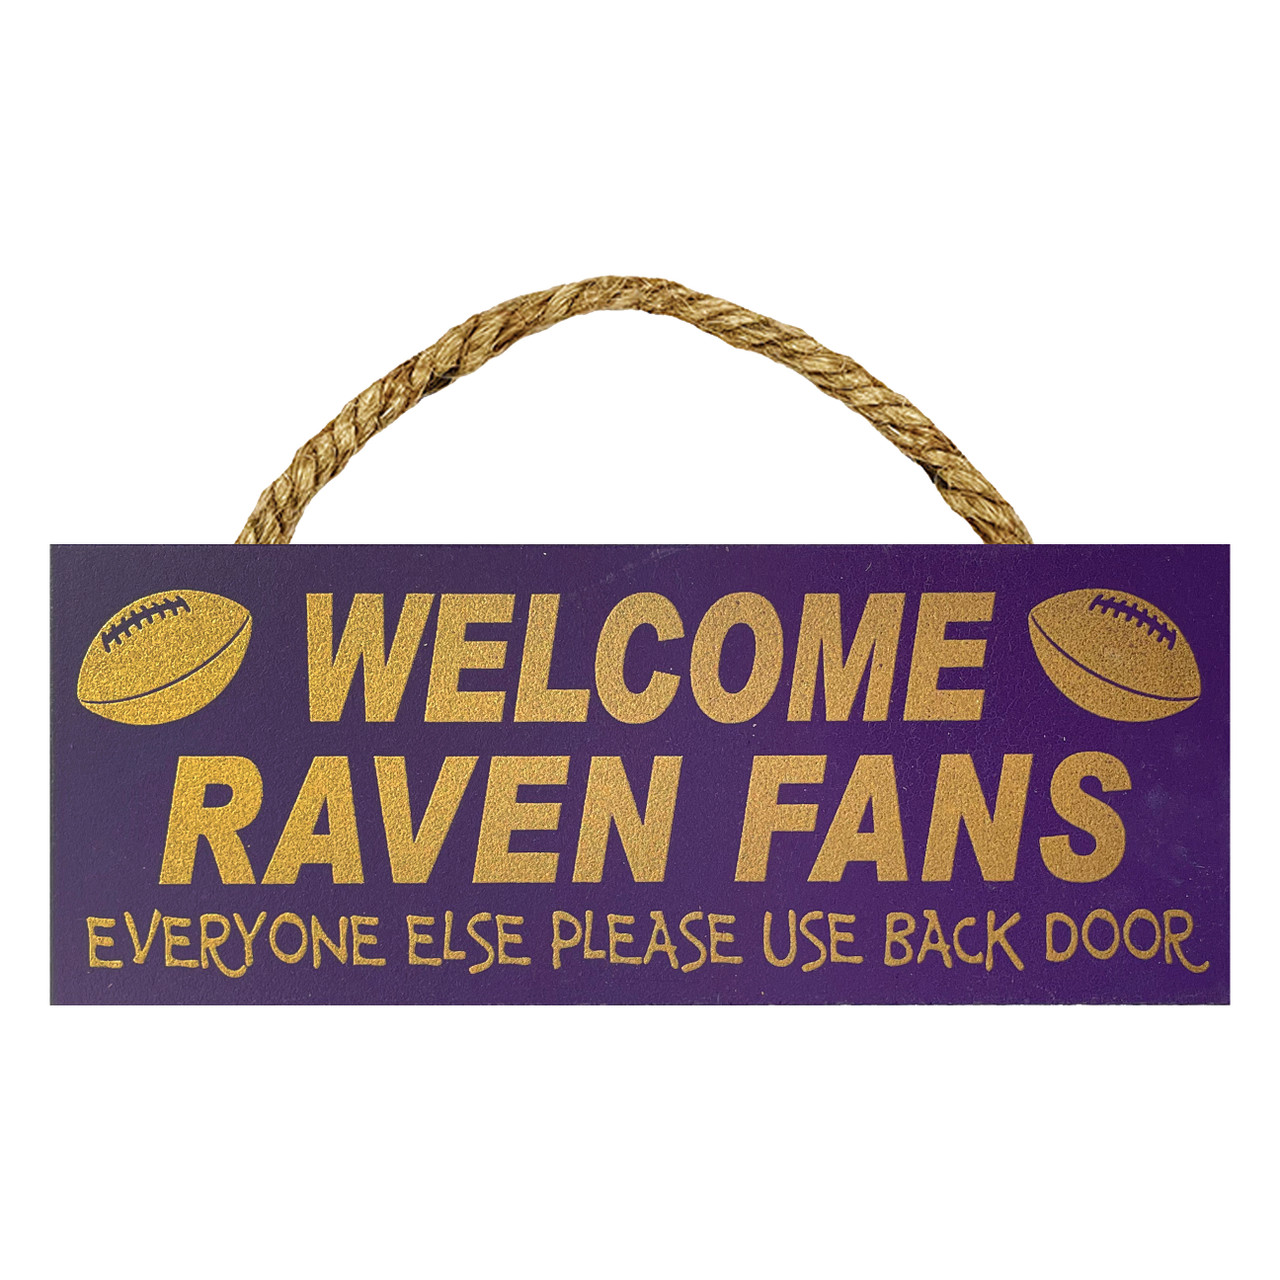 Marketplace　4x10in.　Ravens　Item　Limited　Hanging　Sign　Welcome　Wood　Stock*　Fans　*Discontinued　Country